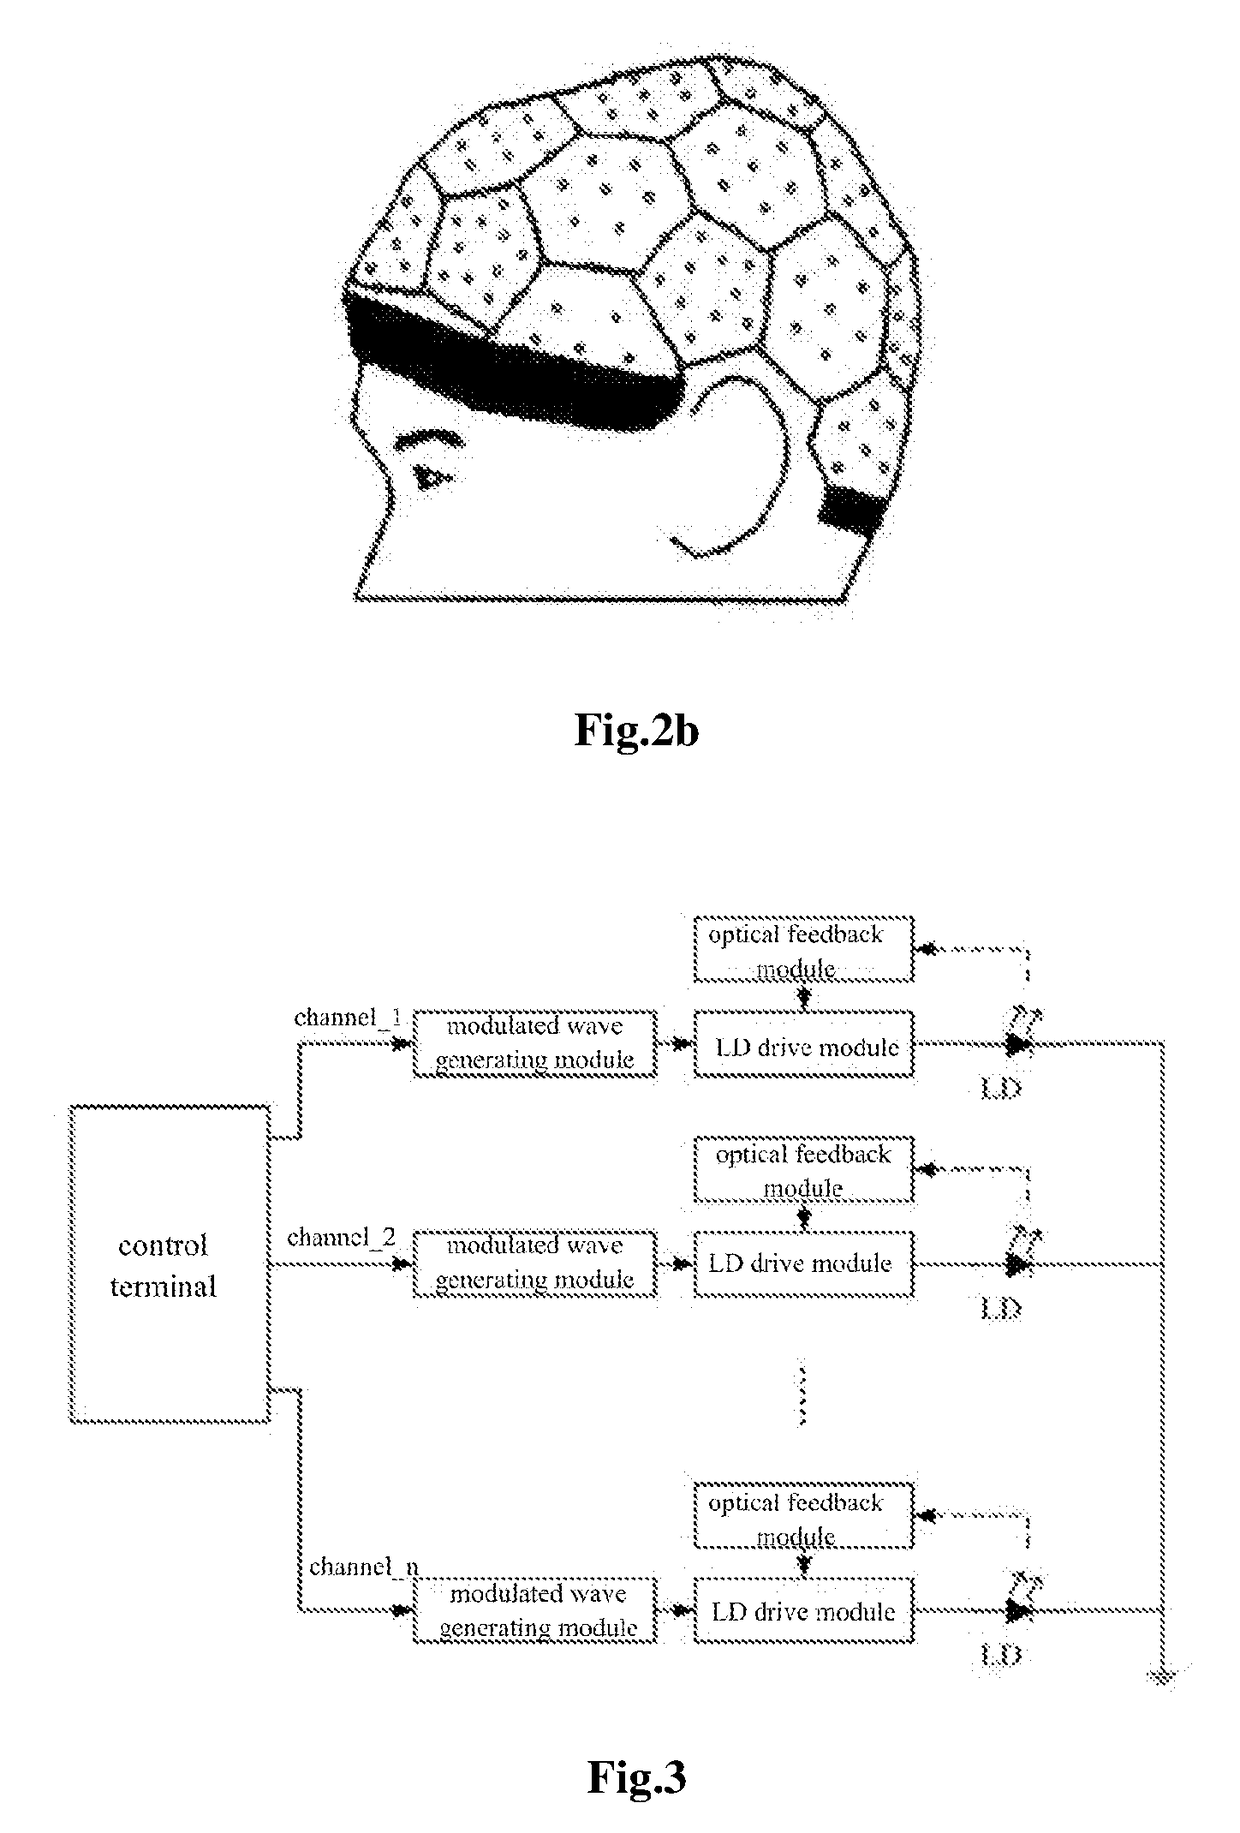 Method and System for Brain Activity Detection